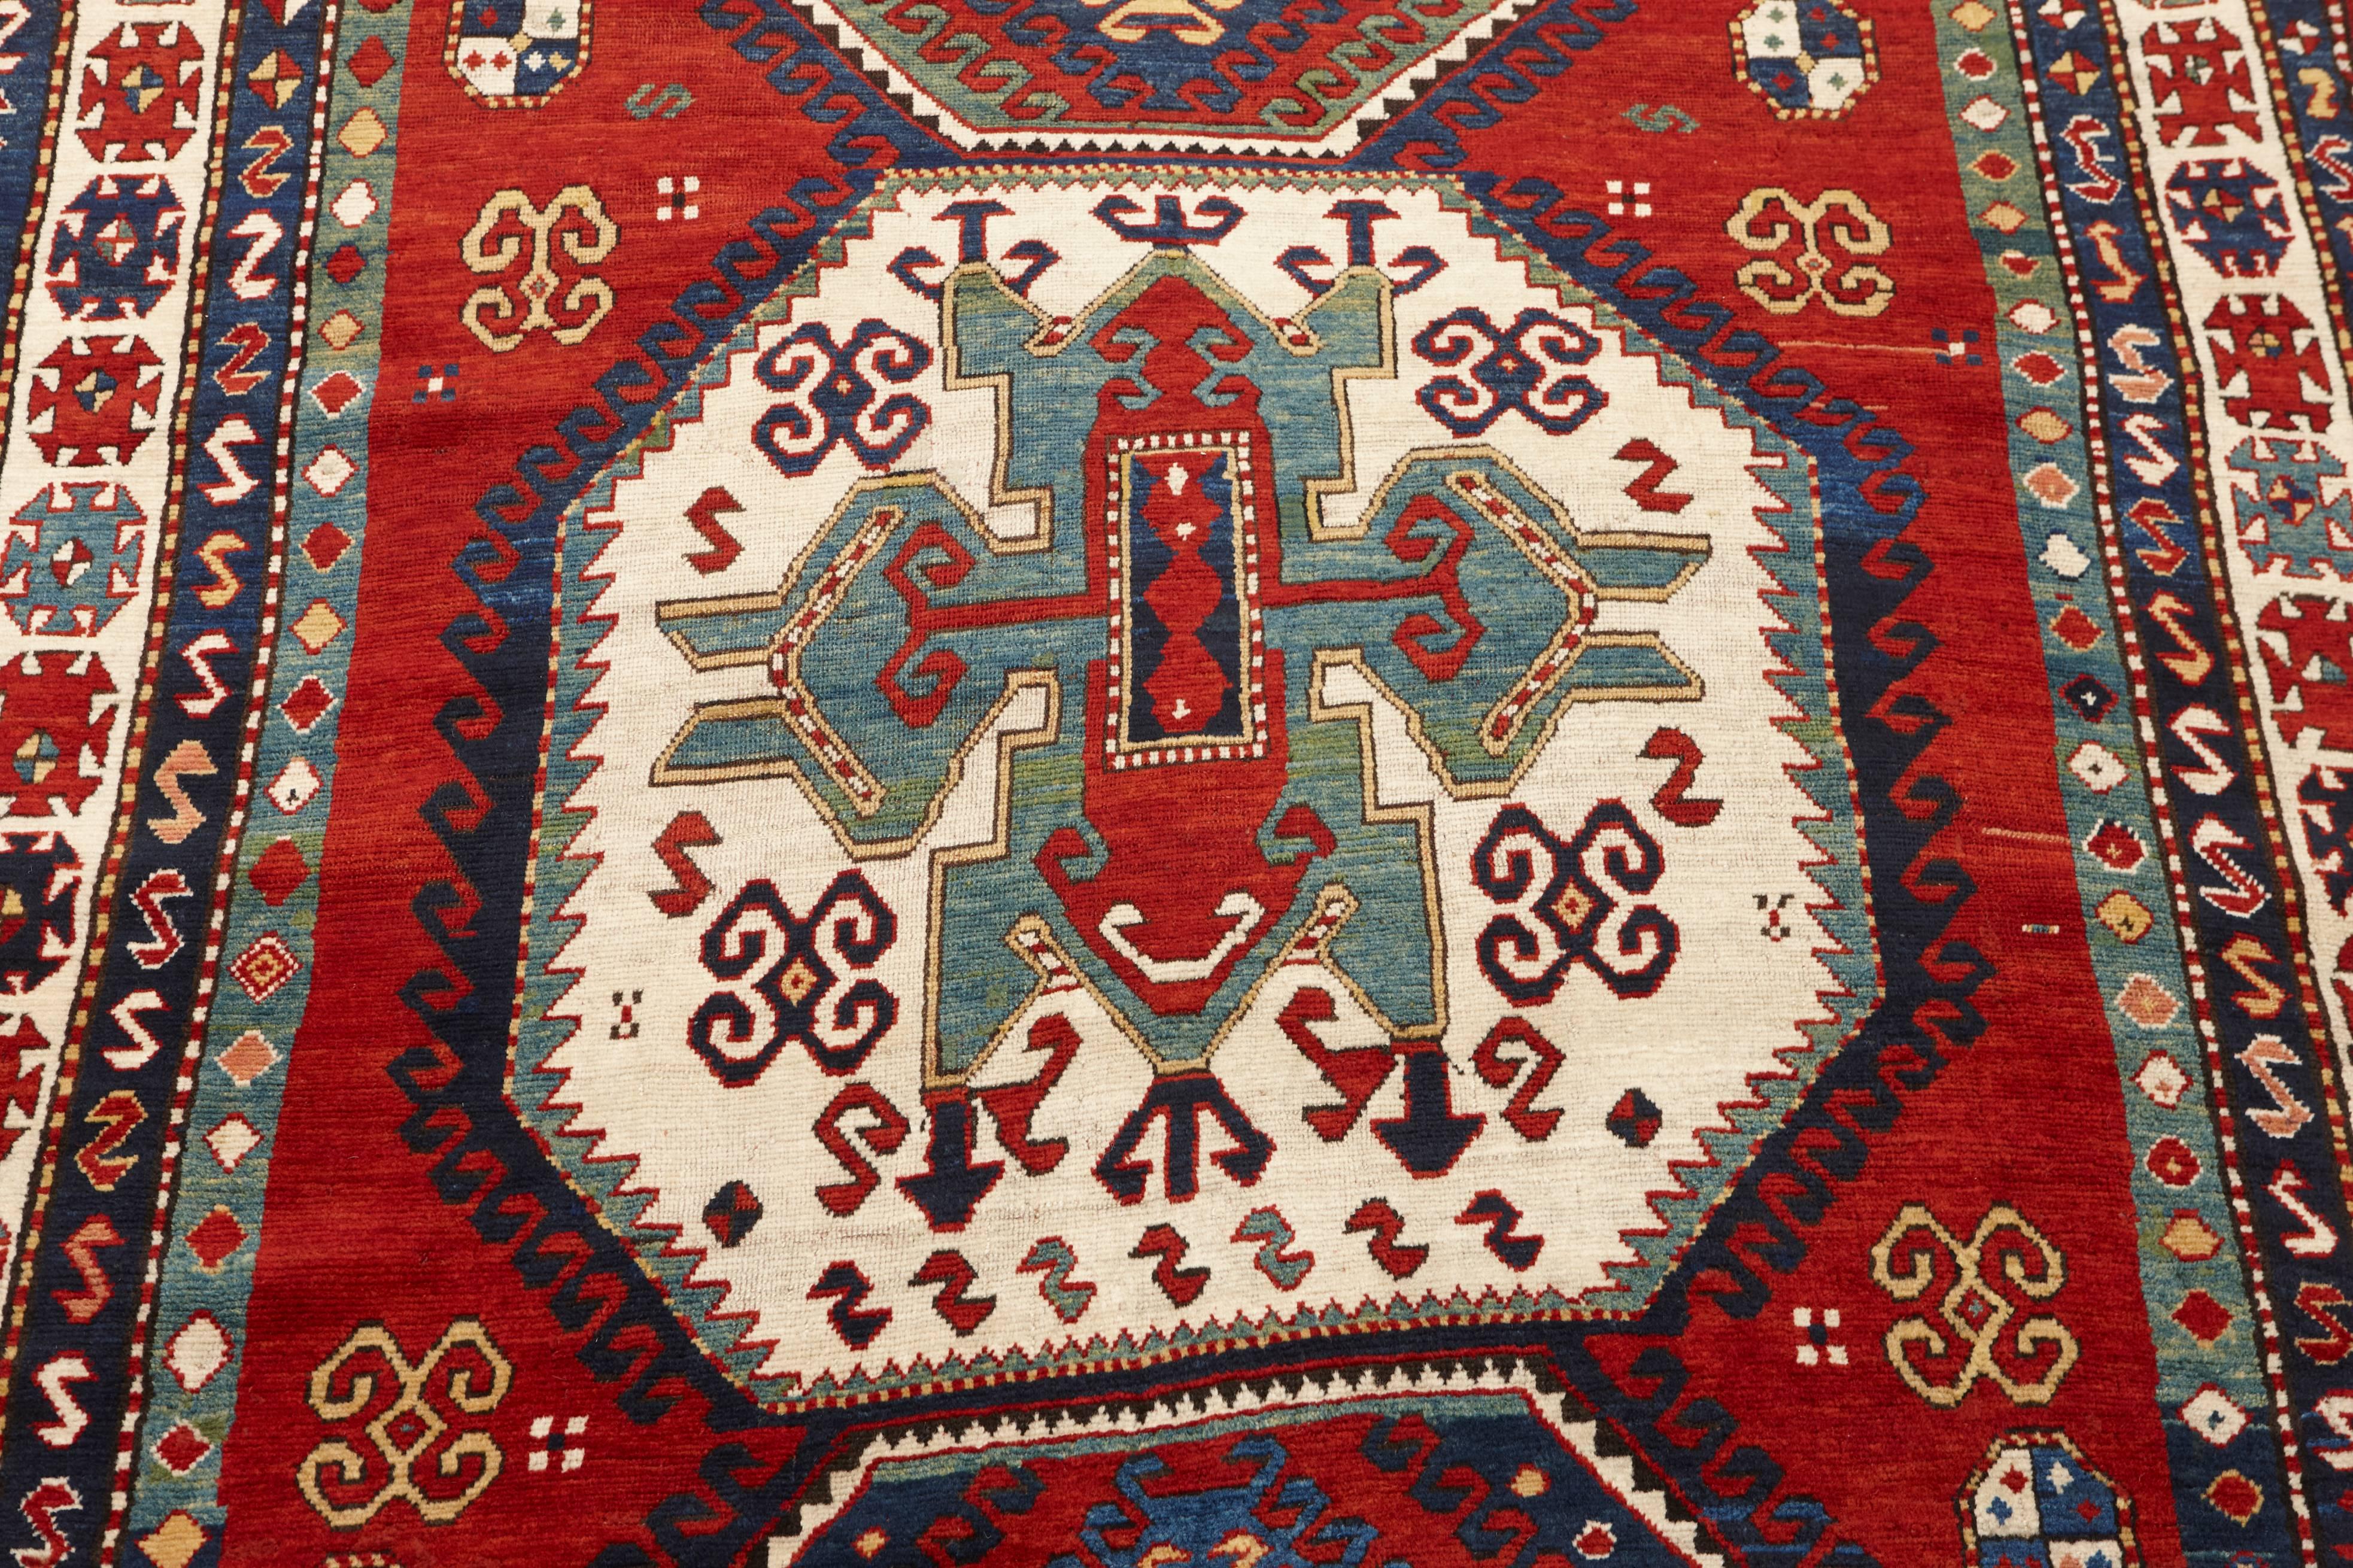 Lori Pambak rugs are some of the most sought-after Caucasian rugs. Woven in the mountainous Lori region of Armenia, rugs from this region are most renowned for their cruciform octagonal shield designs. The most notable of these rugs have rich